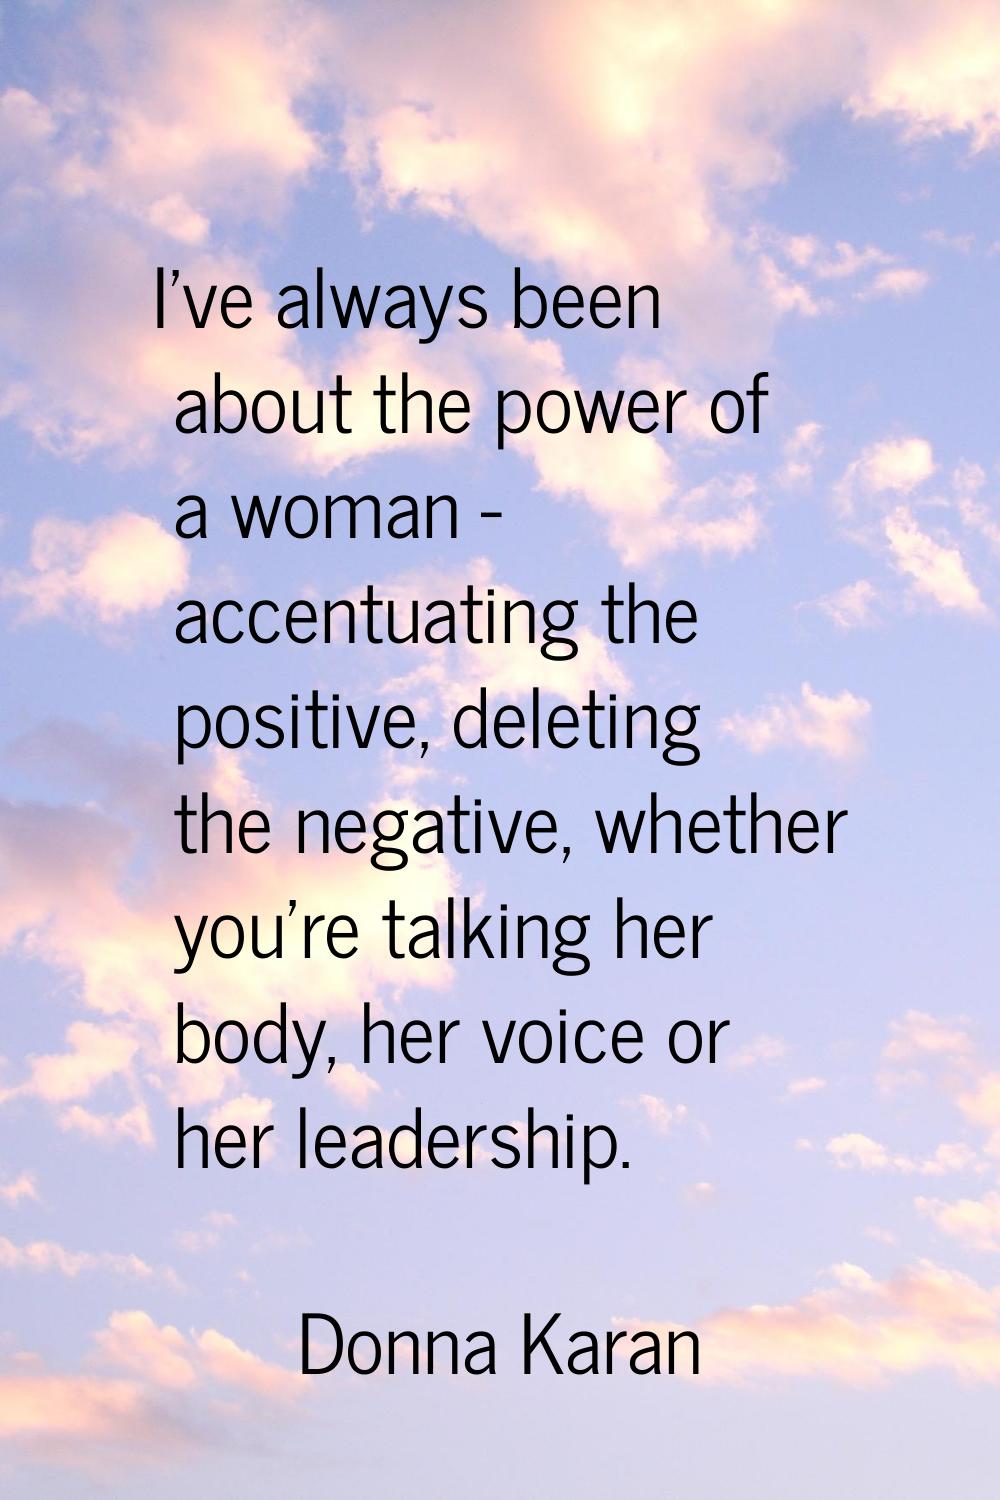 I've always been about the power of a woman - accentuating the positive, deleting the negative, whe